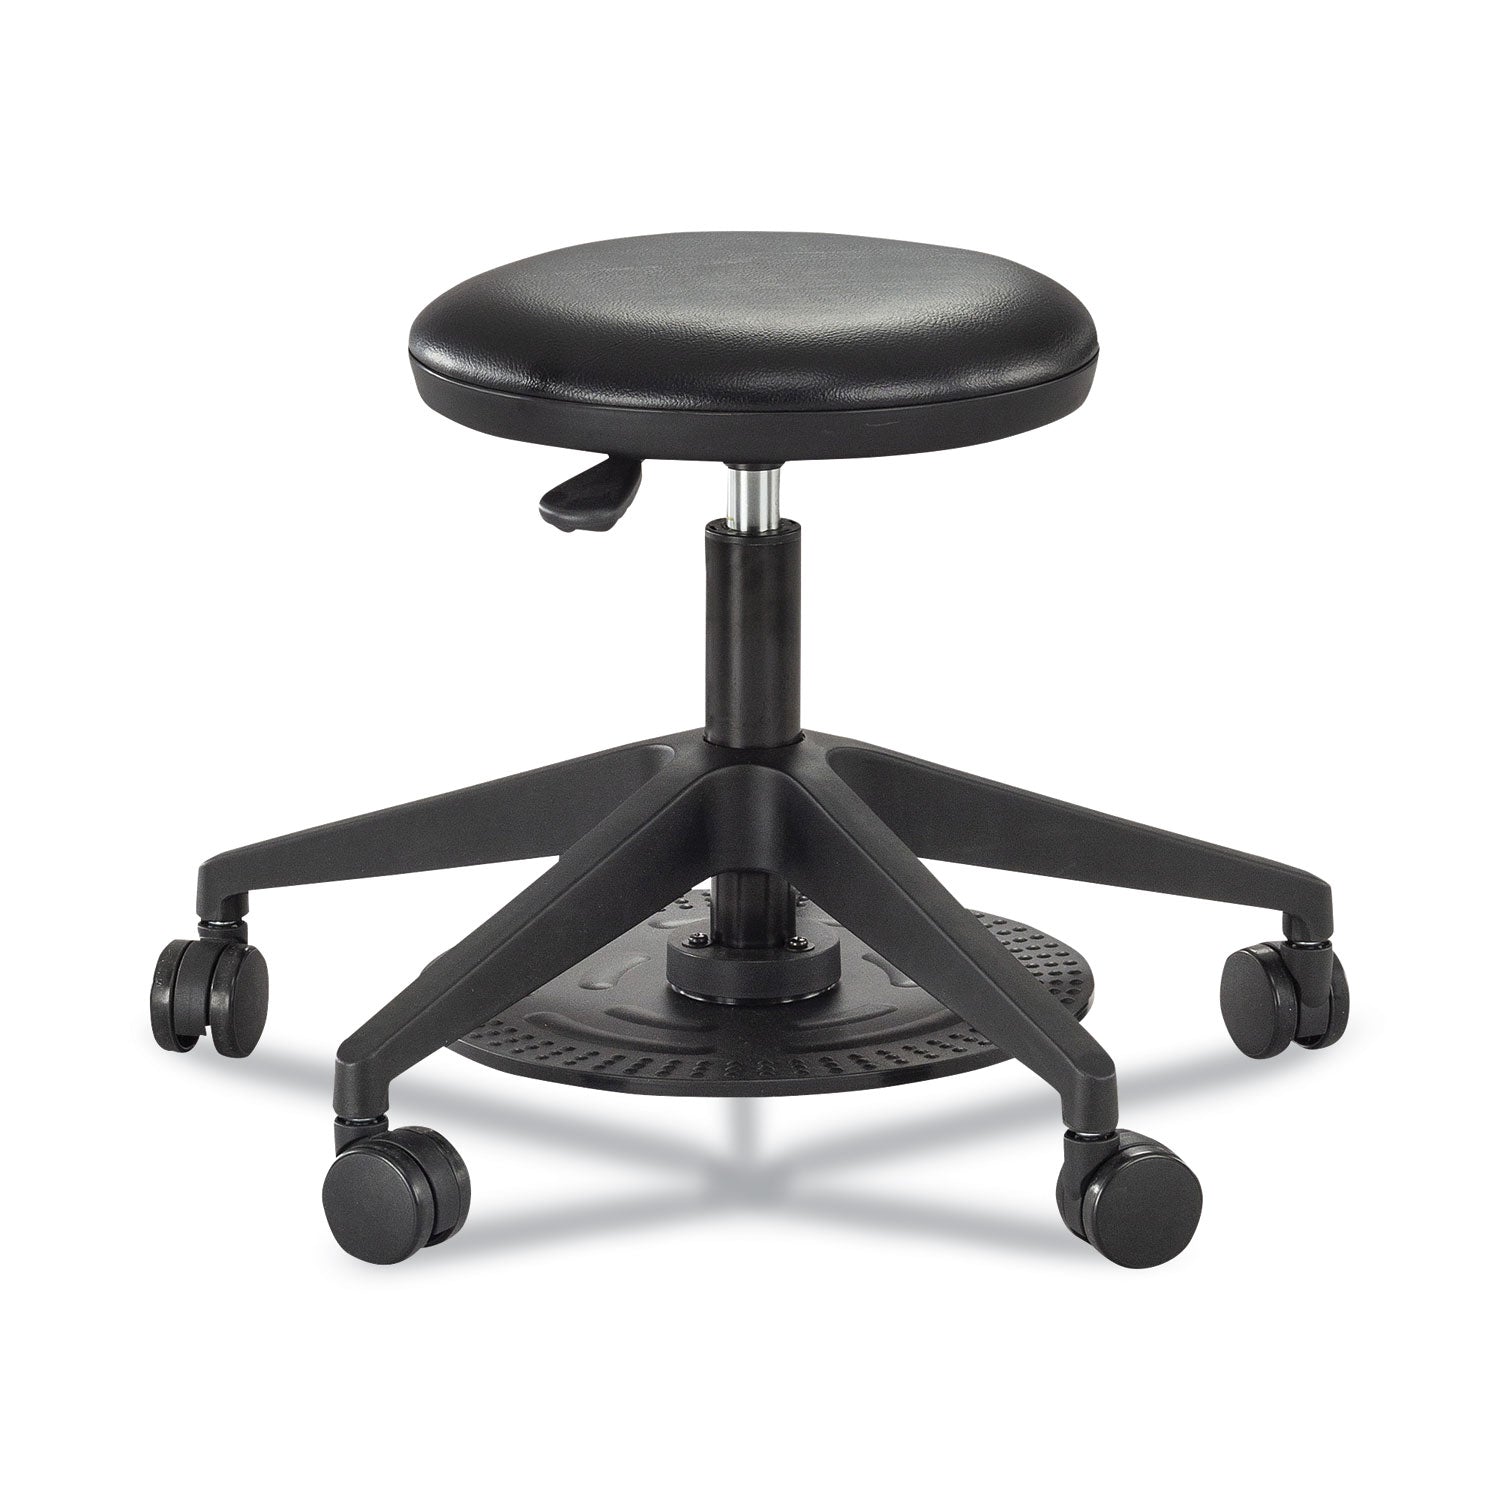 lab-stool-backless-supports-up-to-250-lb-1925-to-2425-seat-height-black_saf3437bl - 5